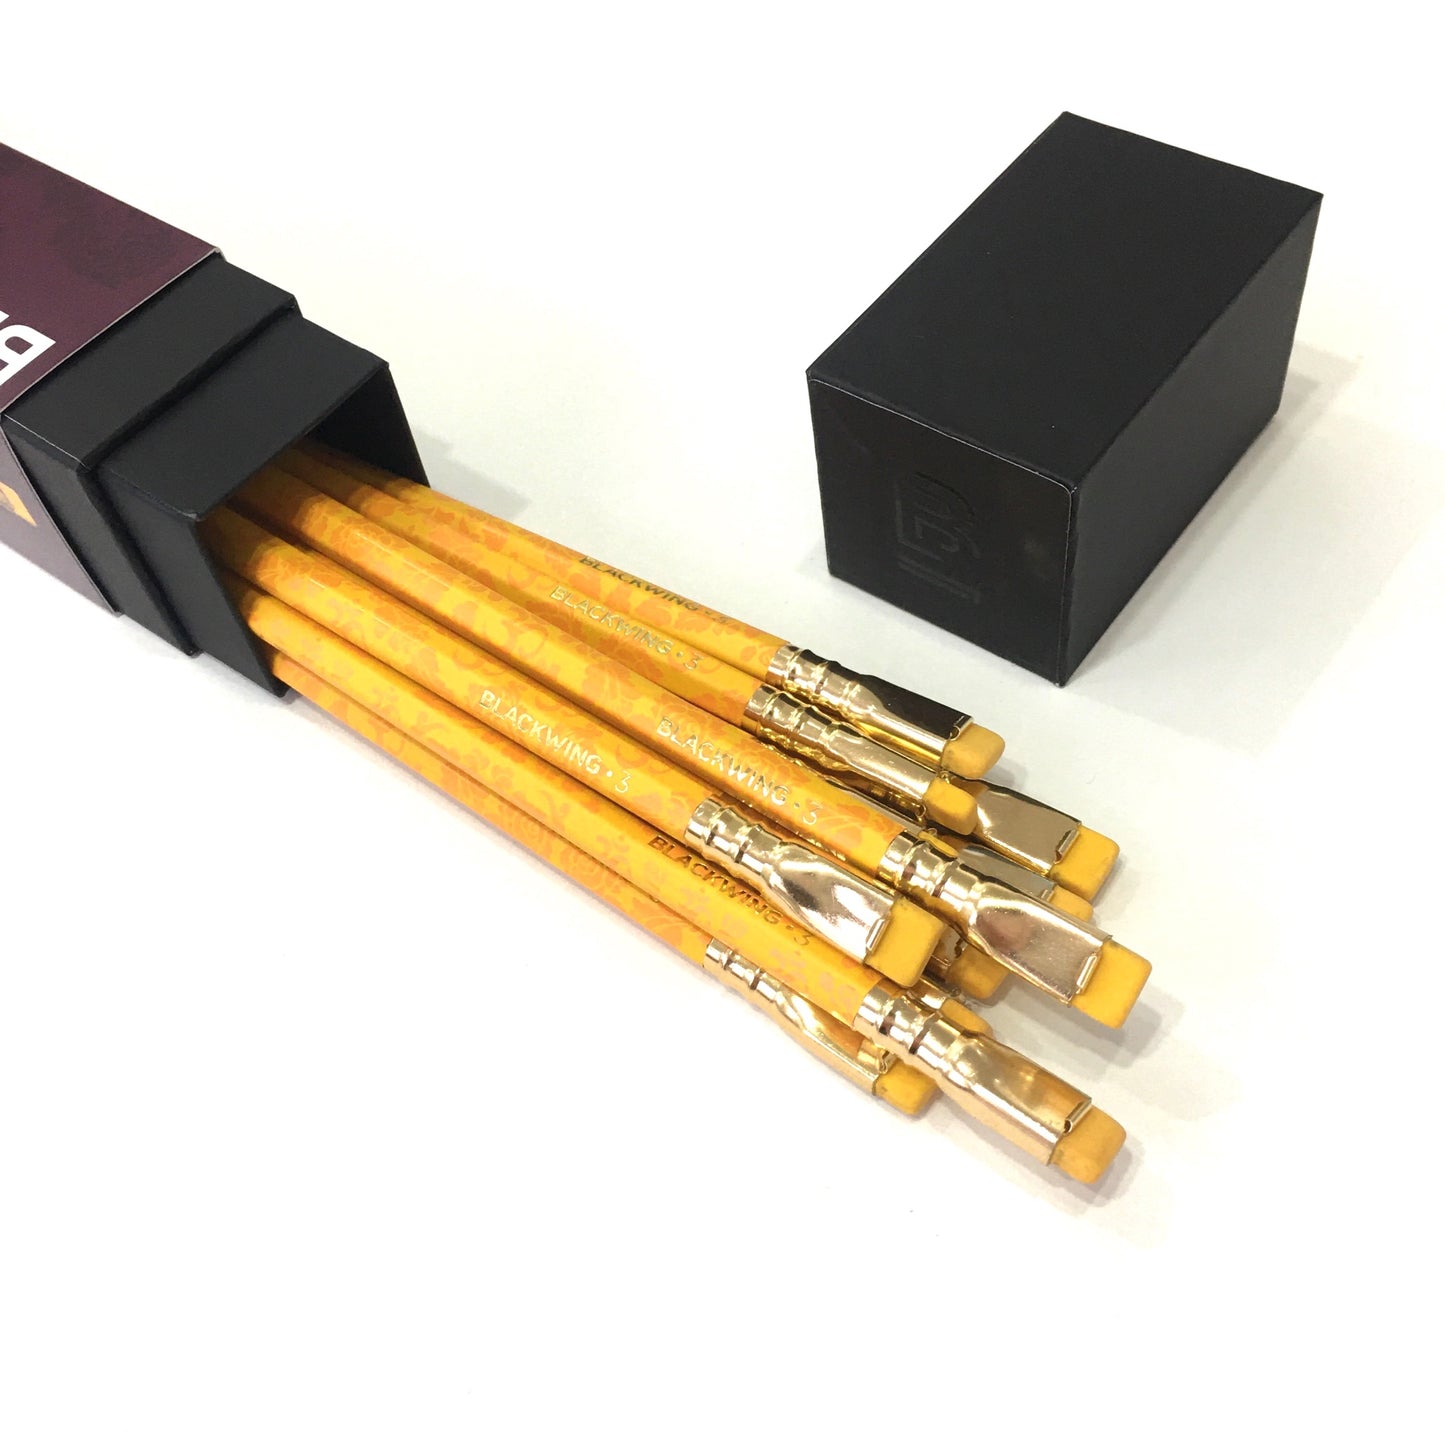 Palomino Blackwing - Volume 3 (Extra-Firm) - Box of 12 - by Blackwing - K. A. Artist Shop